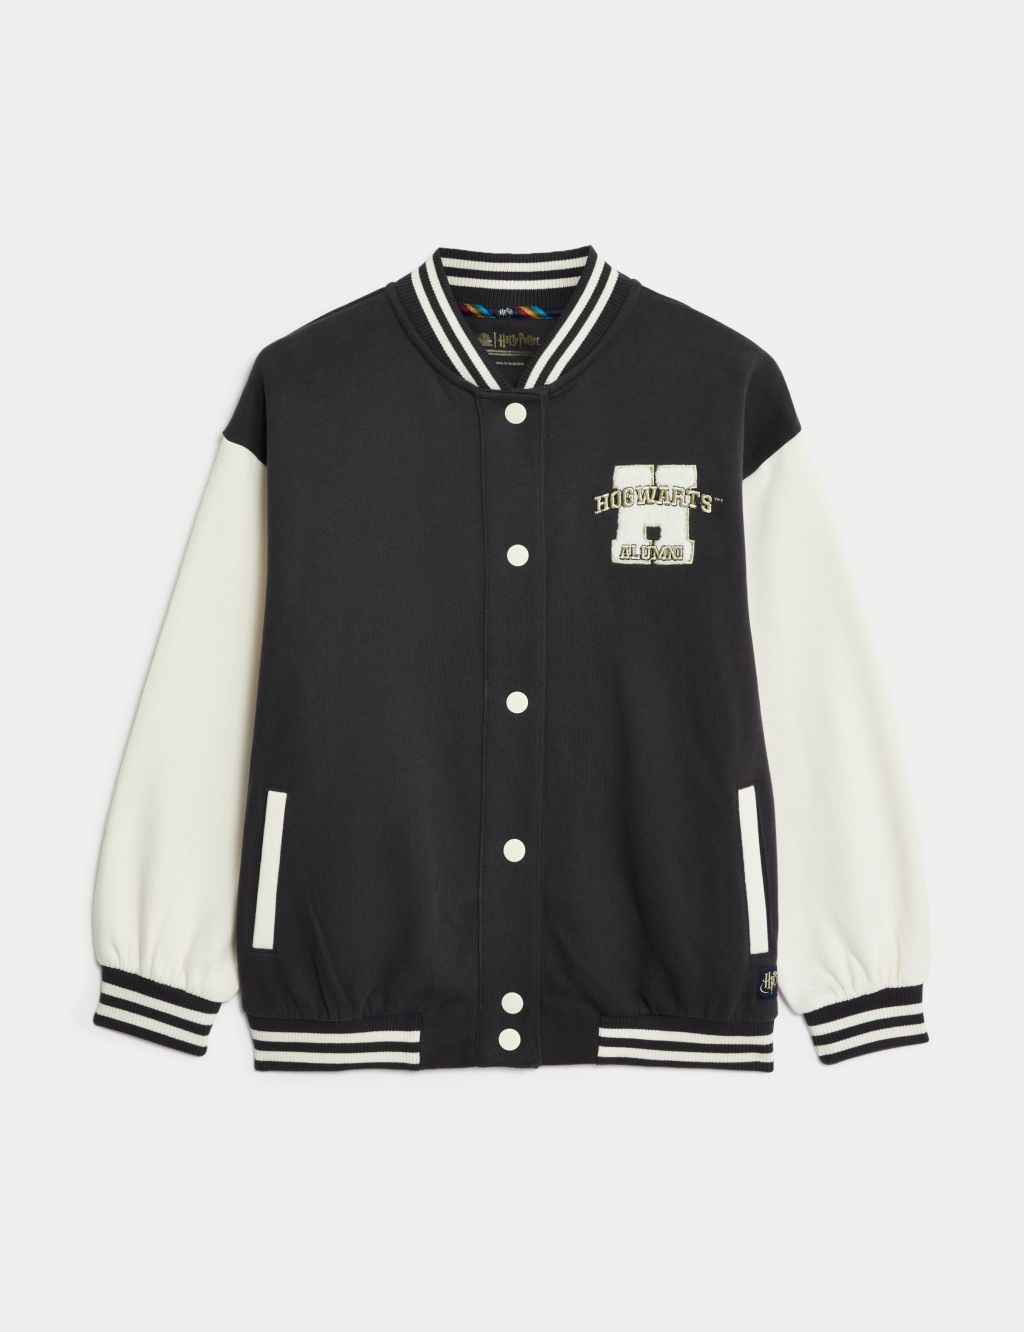 Cotton Rich Harry Potter™ Bomber (6-16 Yrs) image 2